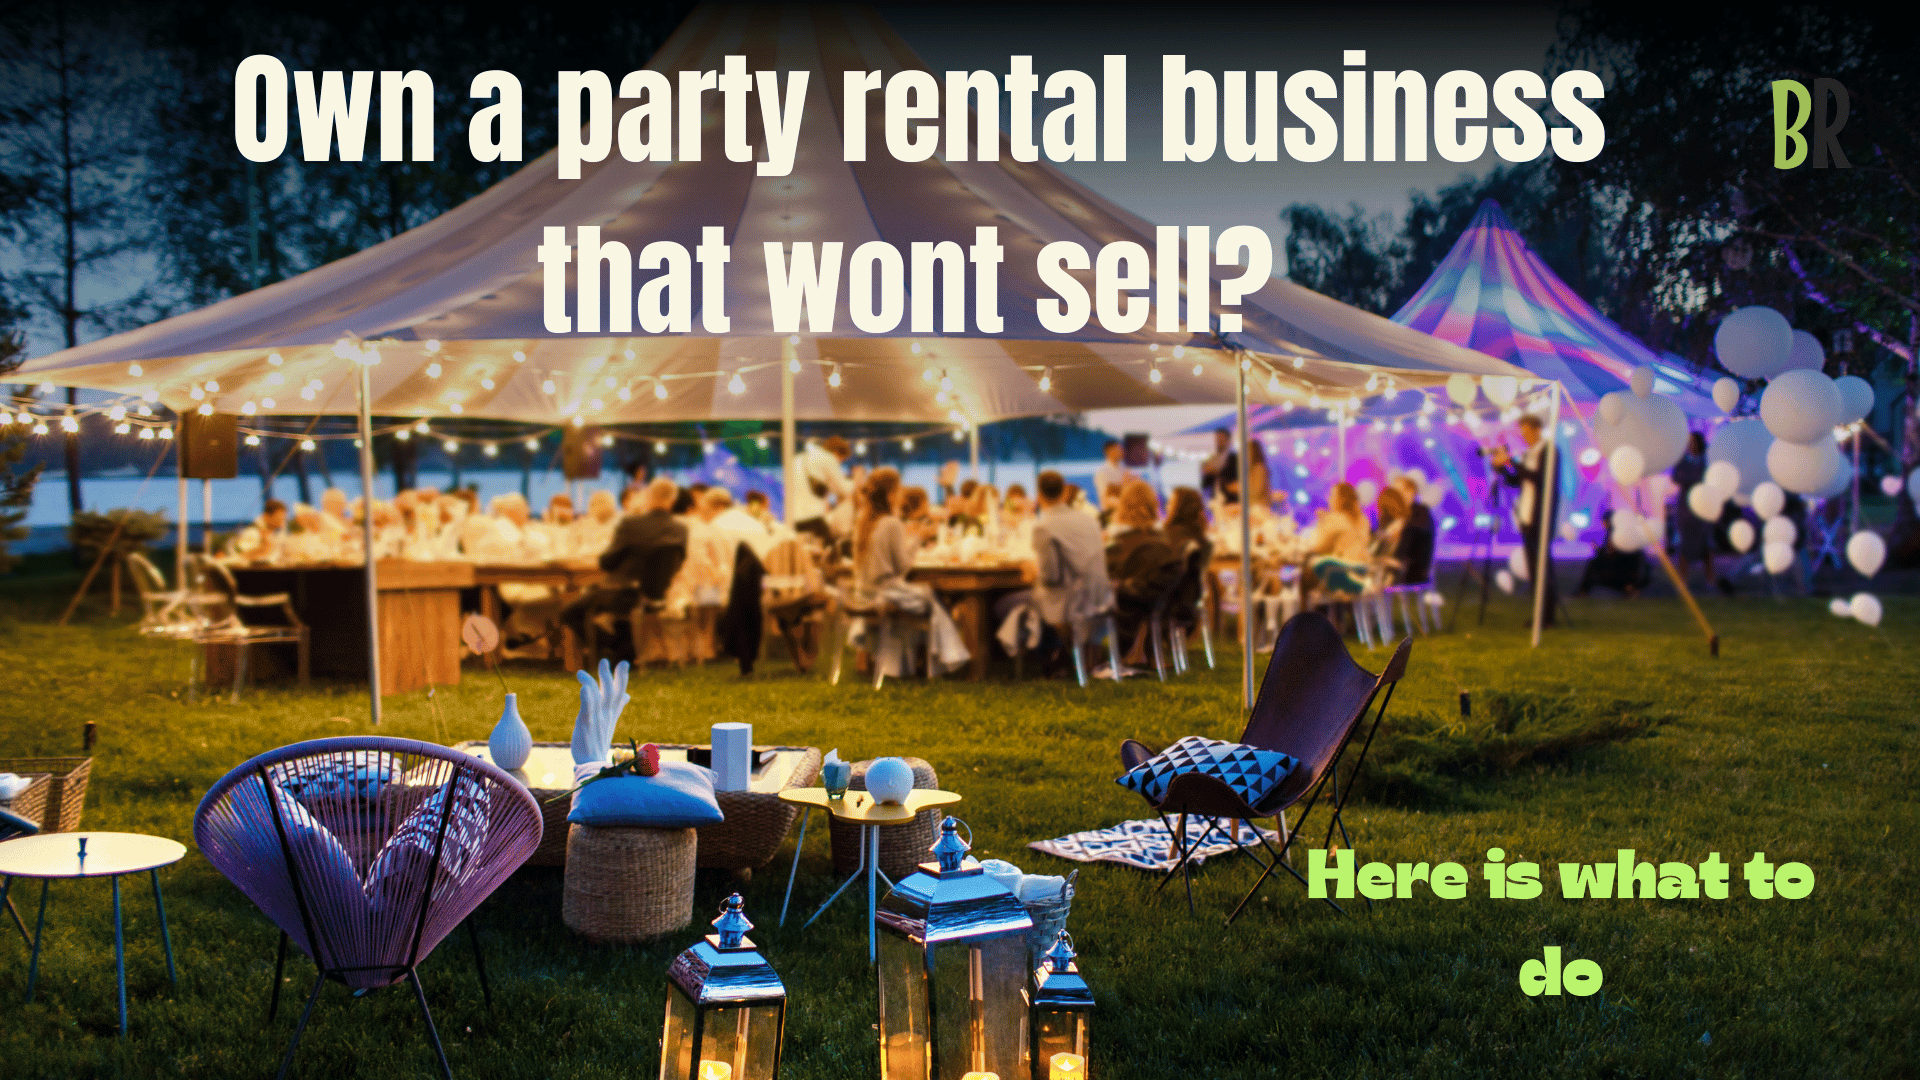 How to sell a party rental business quickly